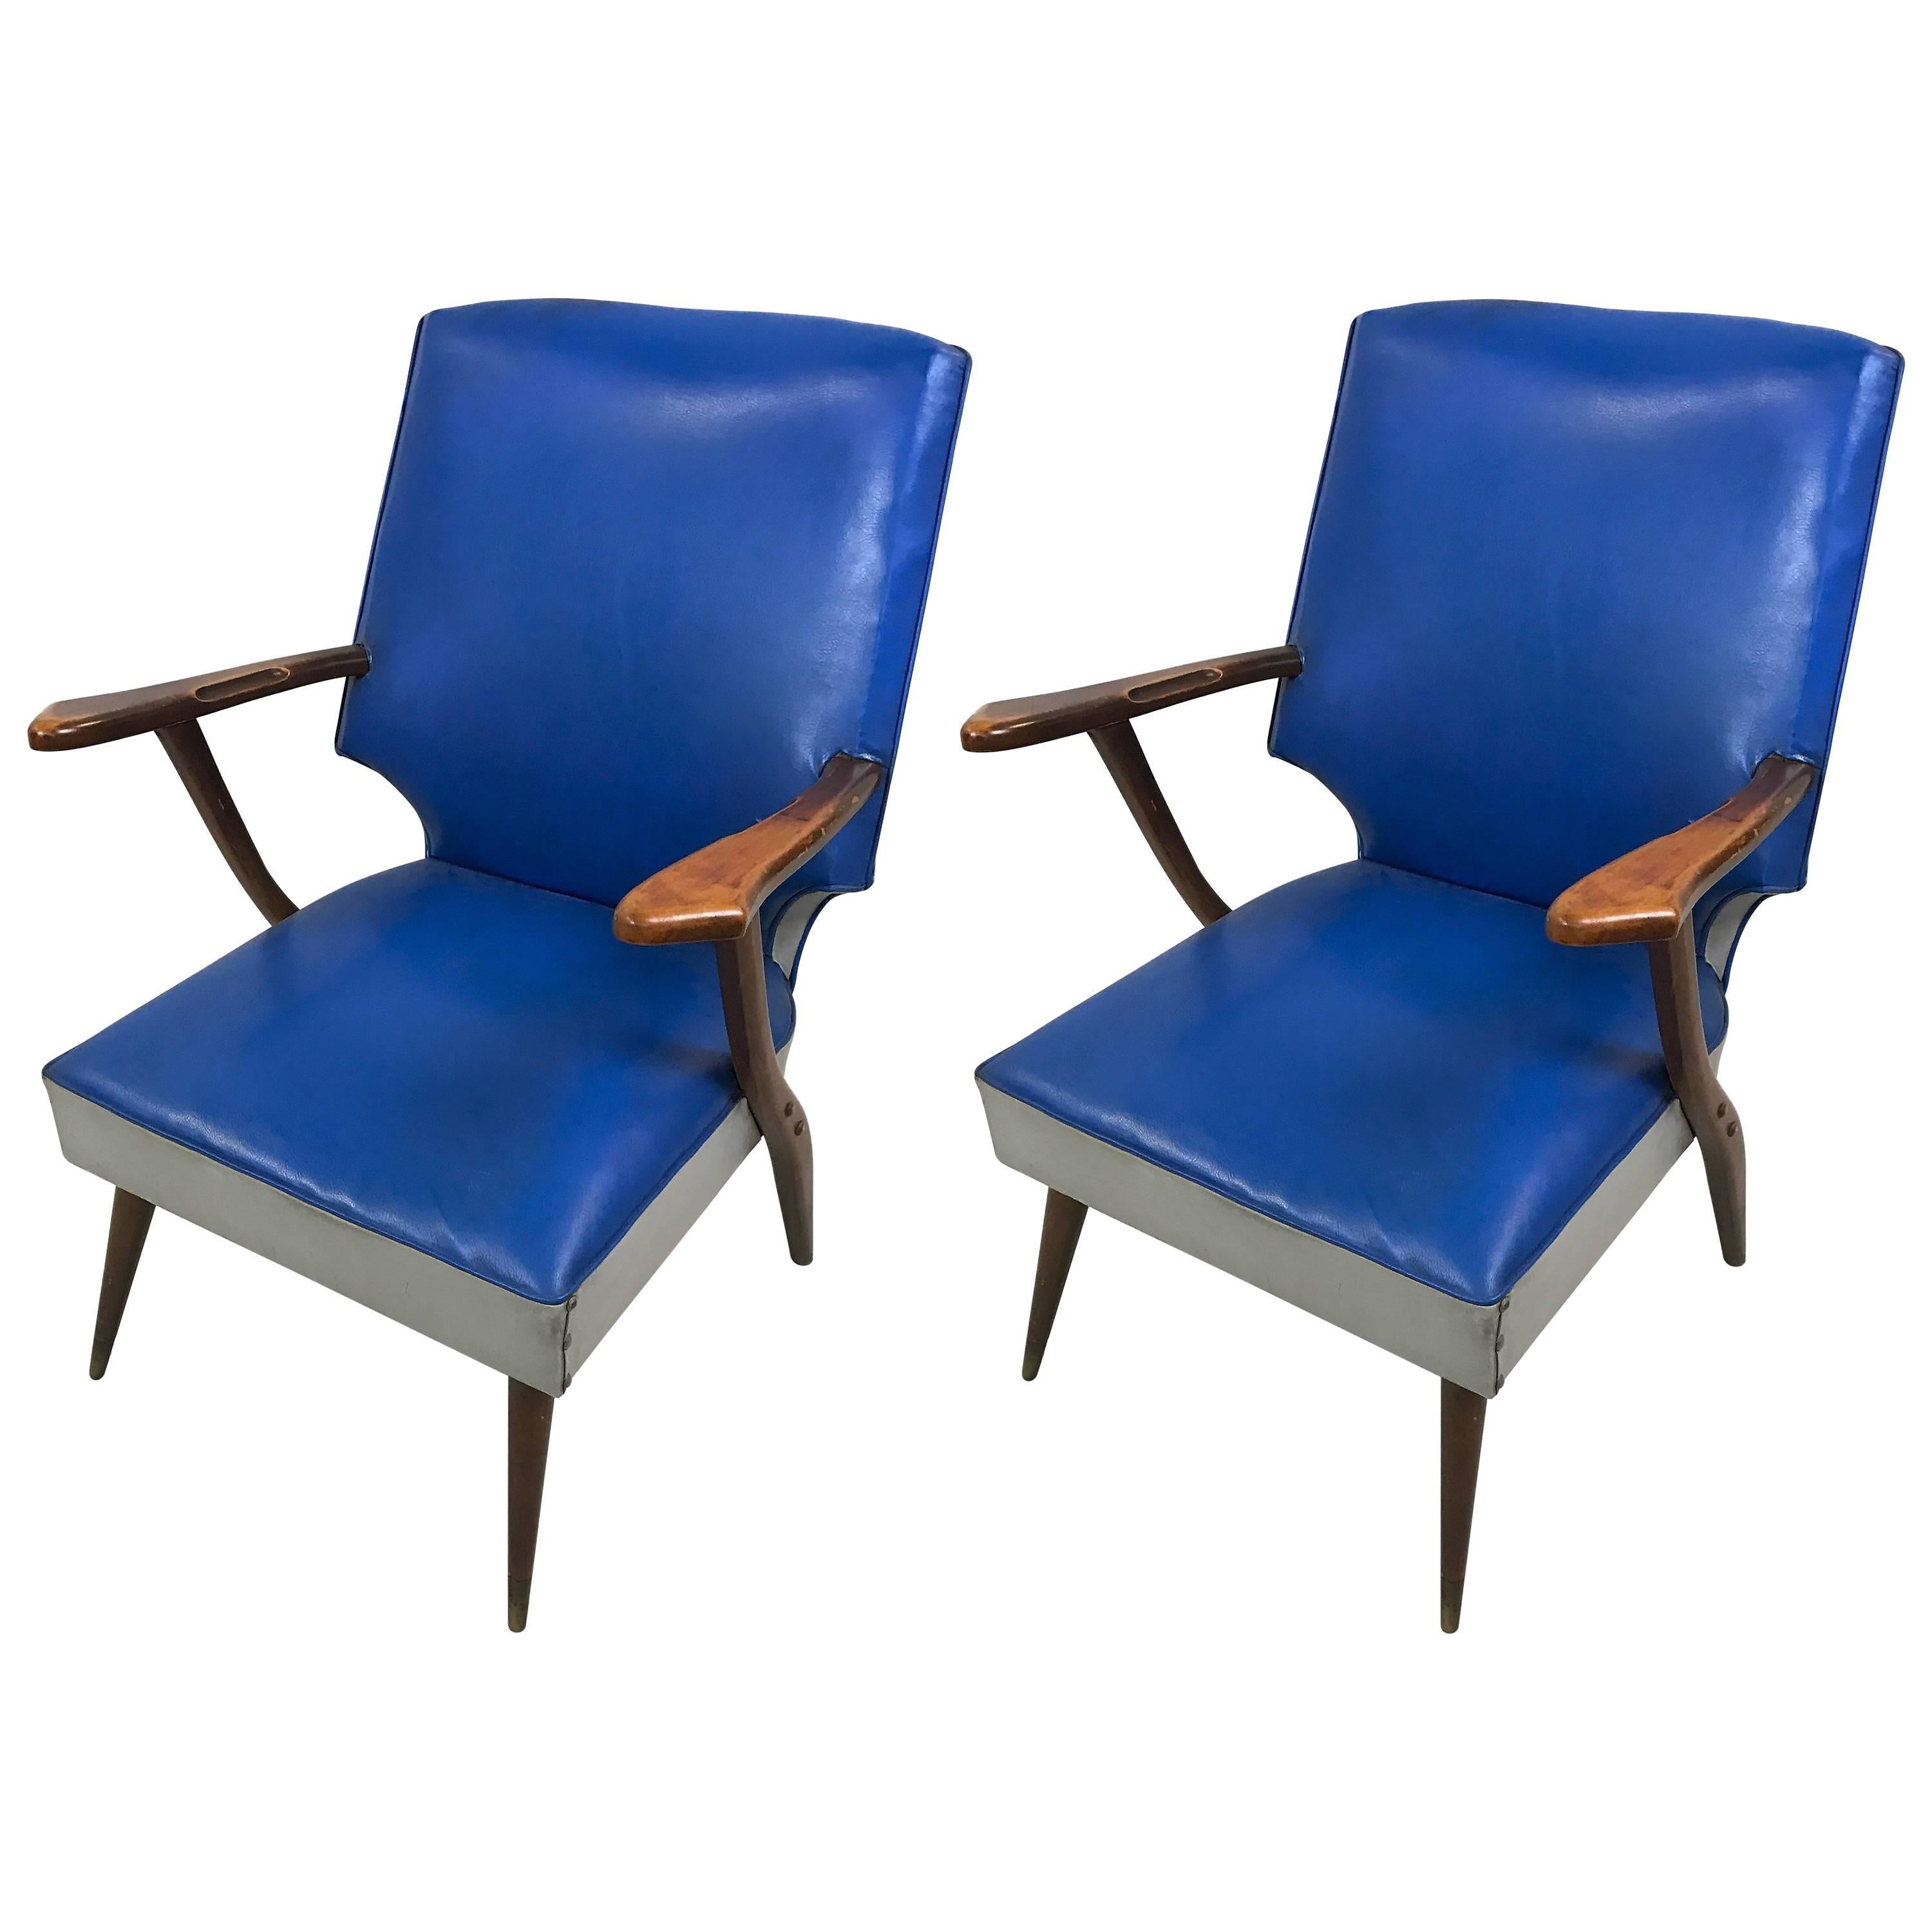 Pair of Mid-Century High-Back Lounge Chairs by Ercol For Sale